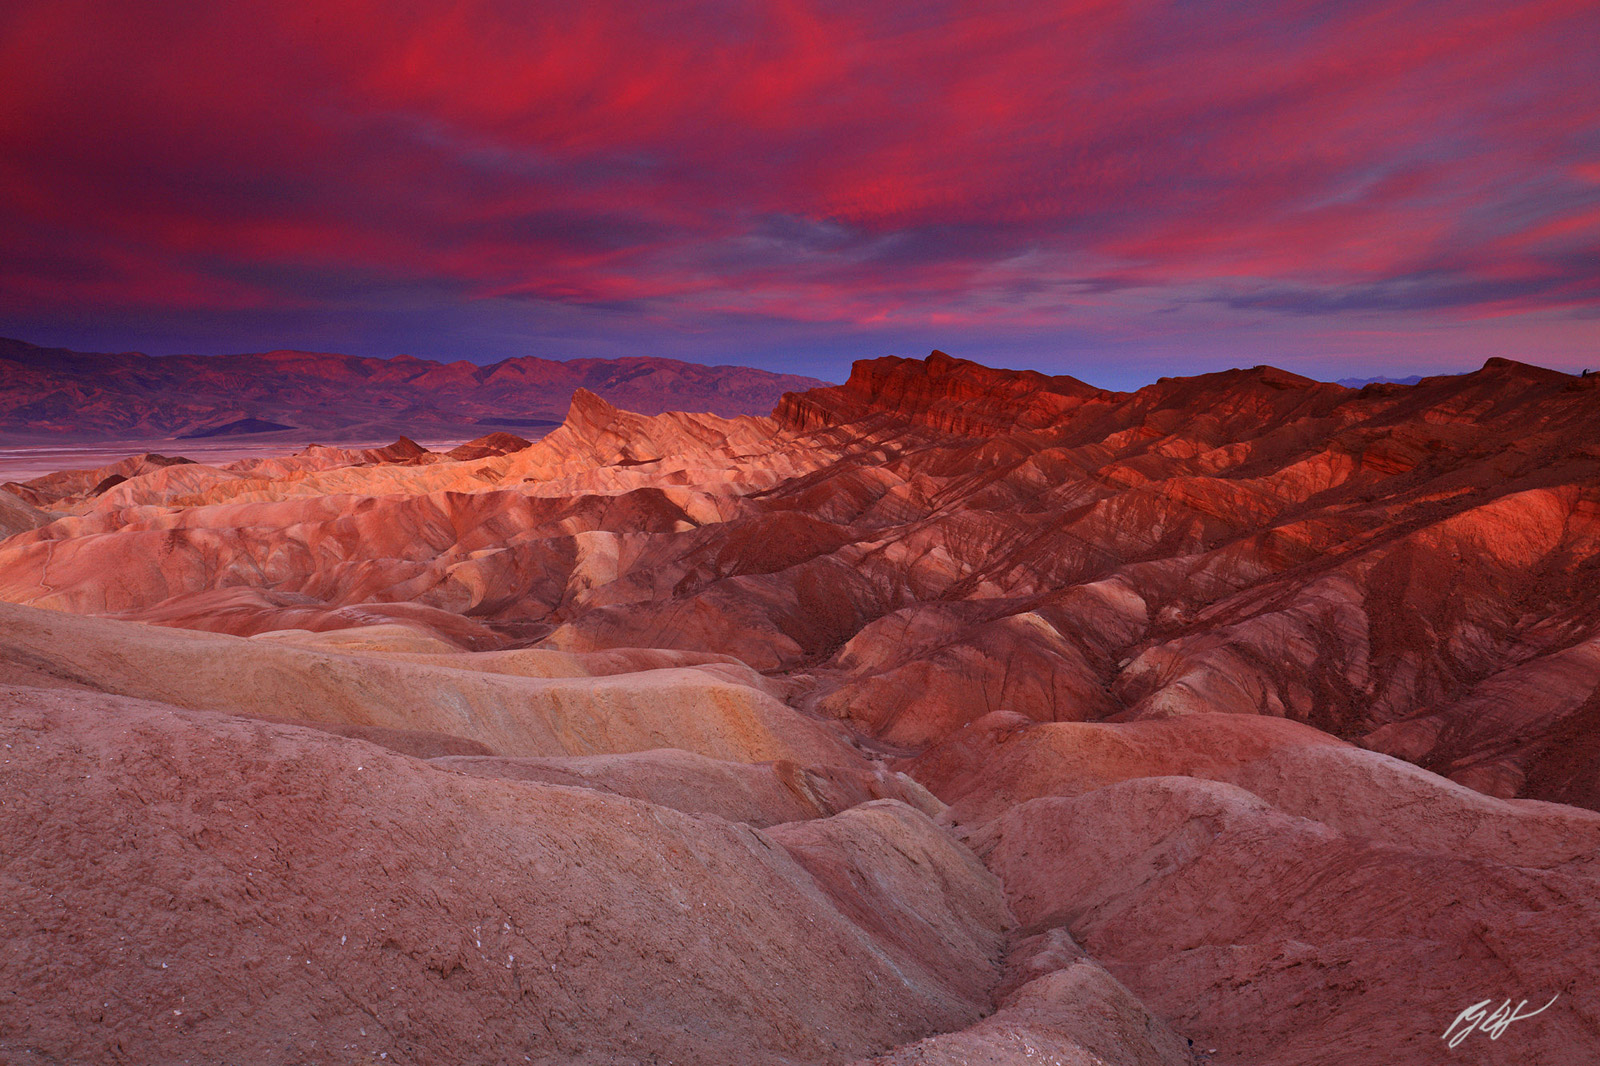 Sunrise over the Alluvial Fans from Zabriskie Point in Death Valley National Park in California